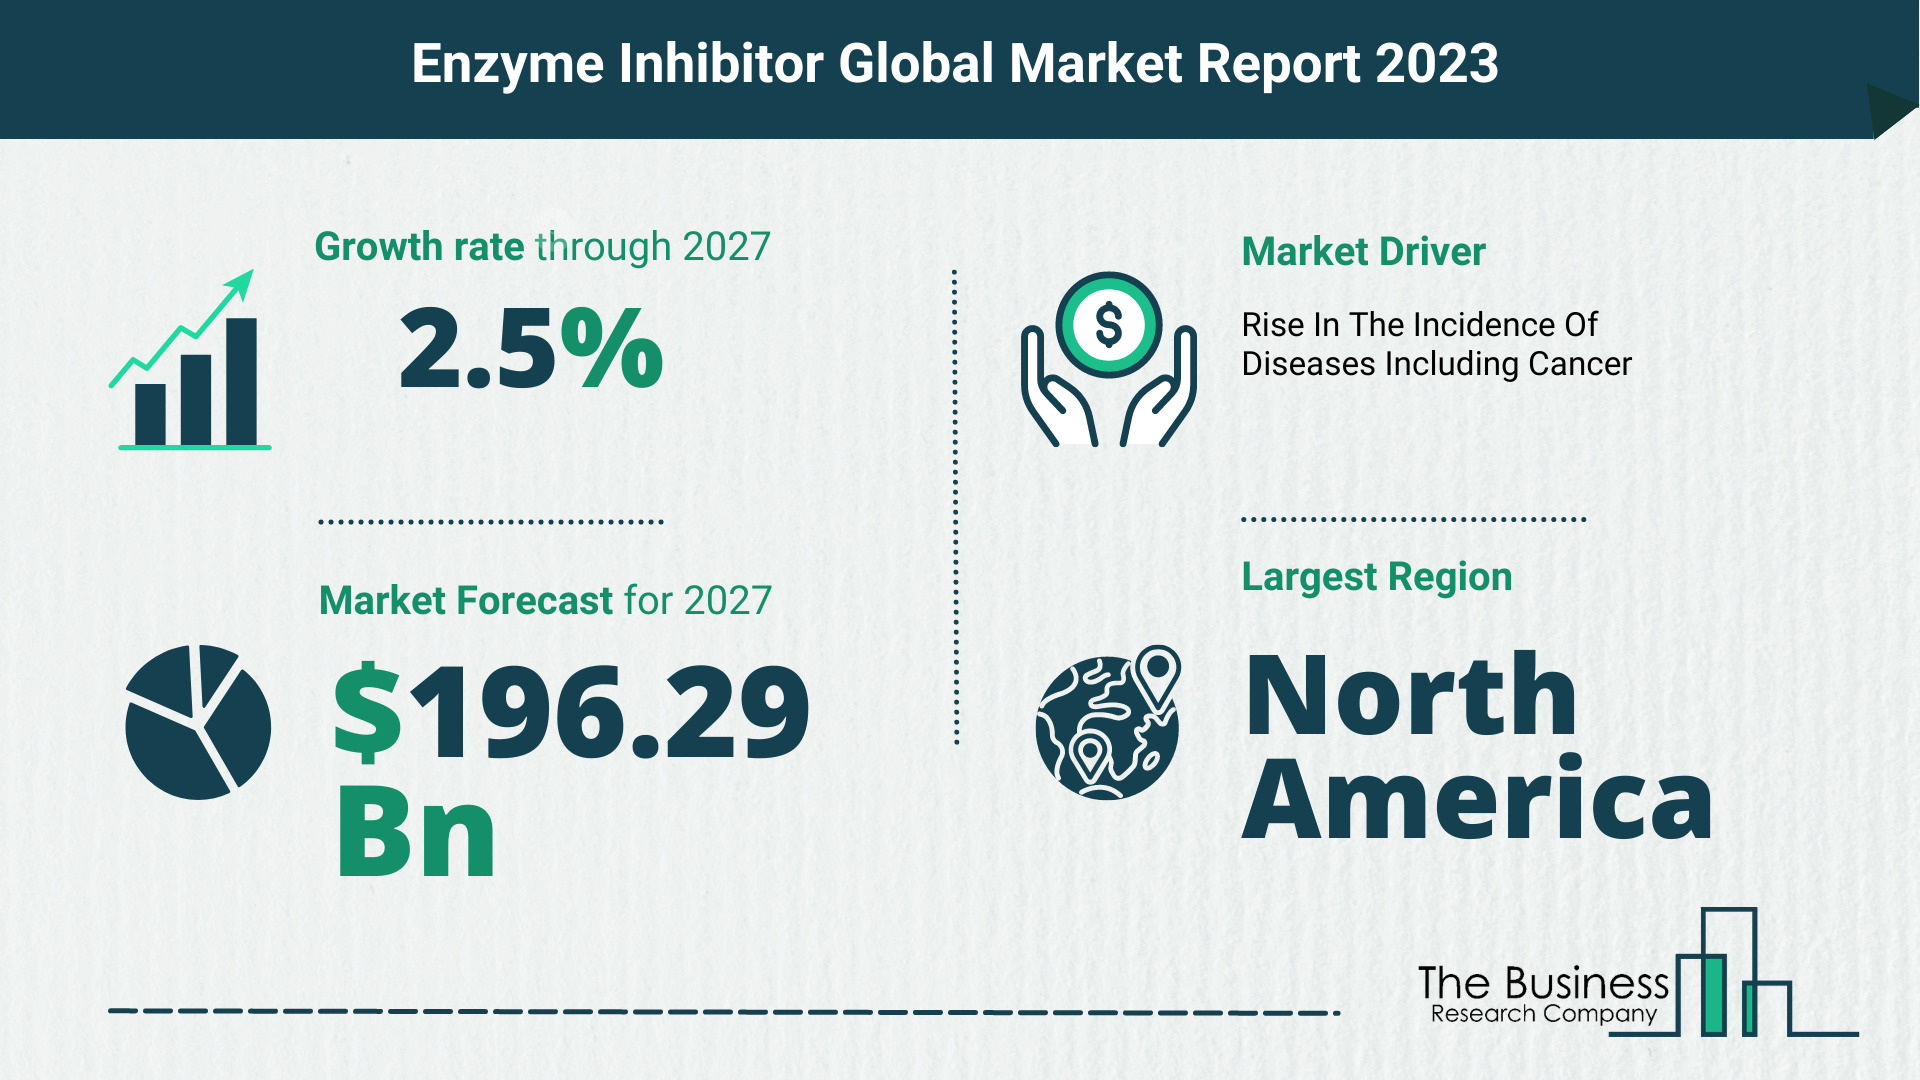 Global Enzyme Inhibitor Market Opportunities And Strategies 2023